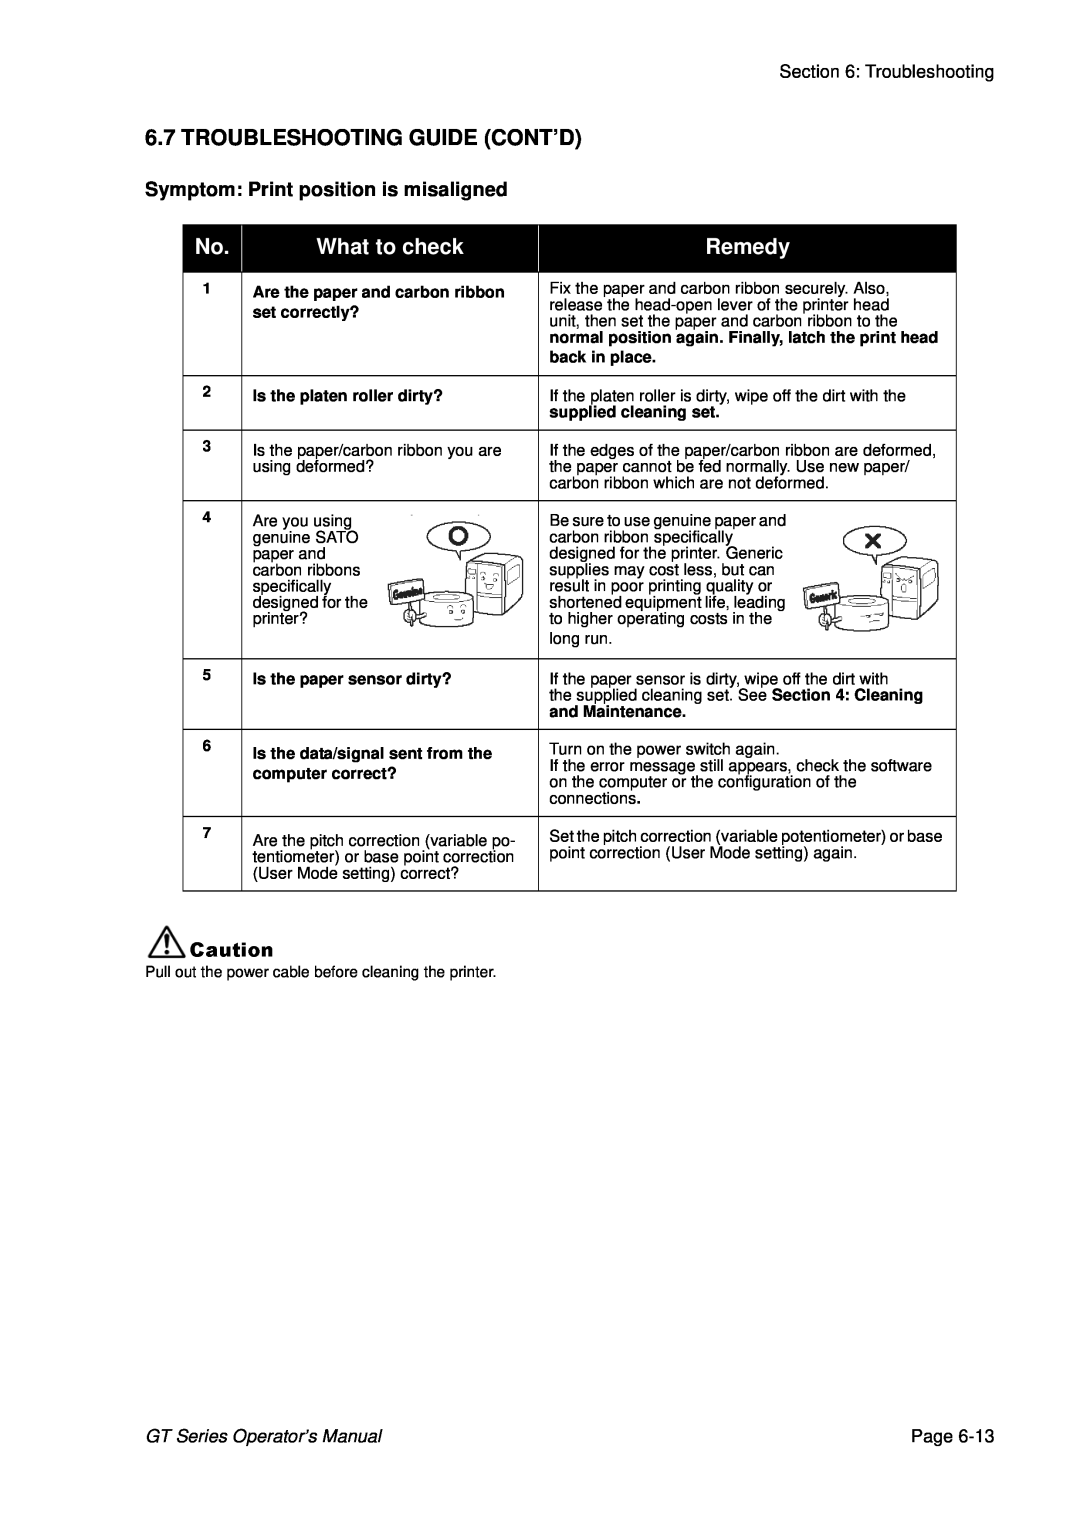 SATO GT424 manual Troubleshooting Guide Cont’D, What to check, Remedy, Symptom Print position is misaligned, Page 